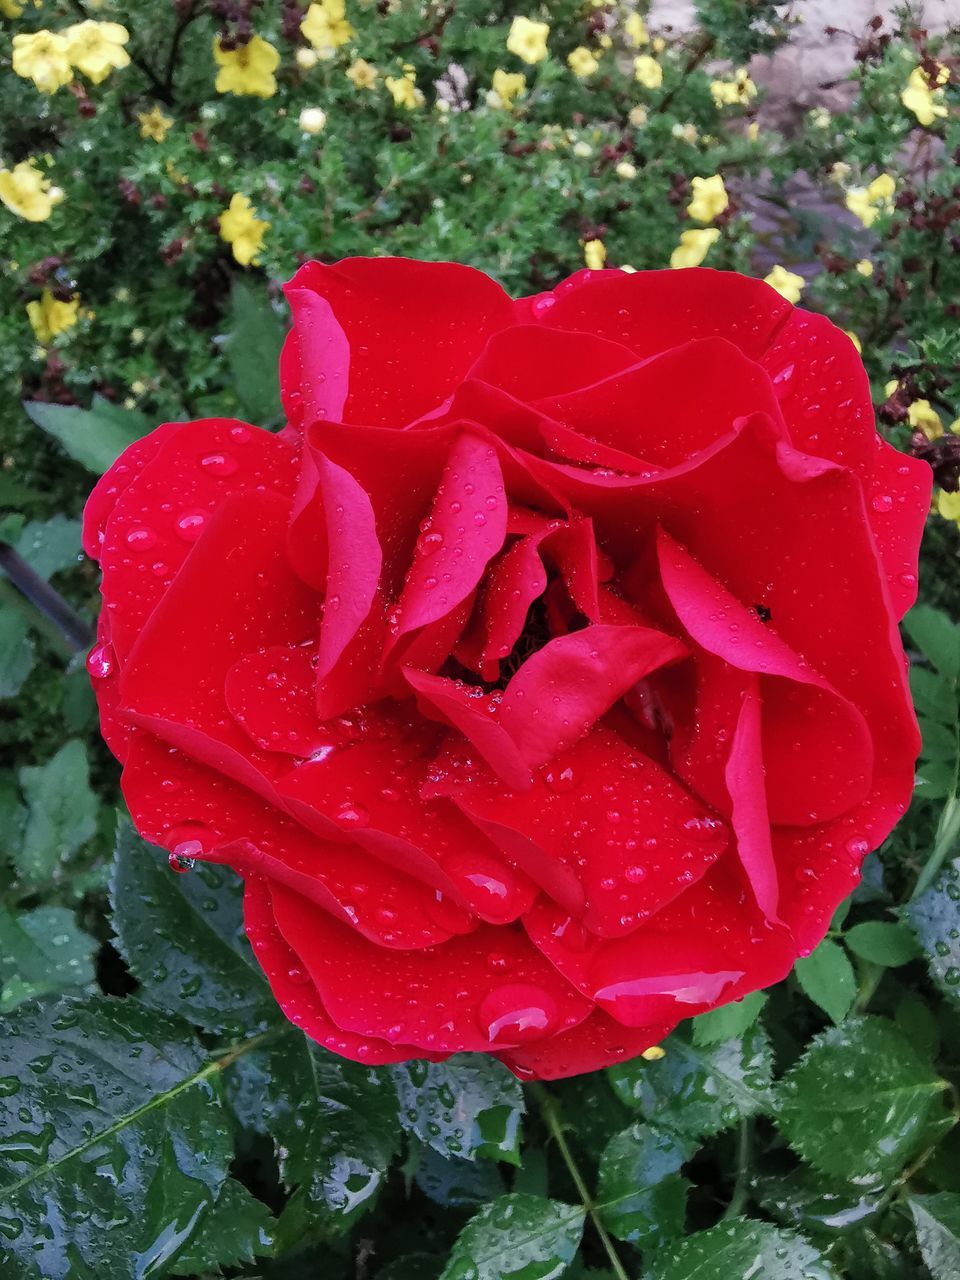 plant, flower, flowering plant, red, rose, garden roses, beauty in nature, freshness, growth, nature, petal, inflorescence, fragility, flower head, close-up, leaf, plant part, high angle view, wet, no people, drop, day, love, outdoors, positive emotion, water, green